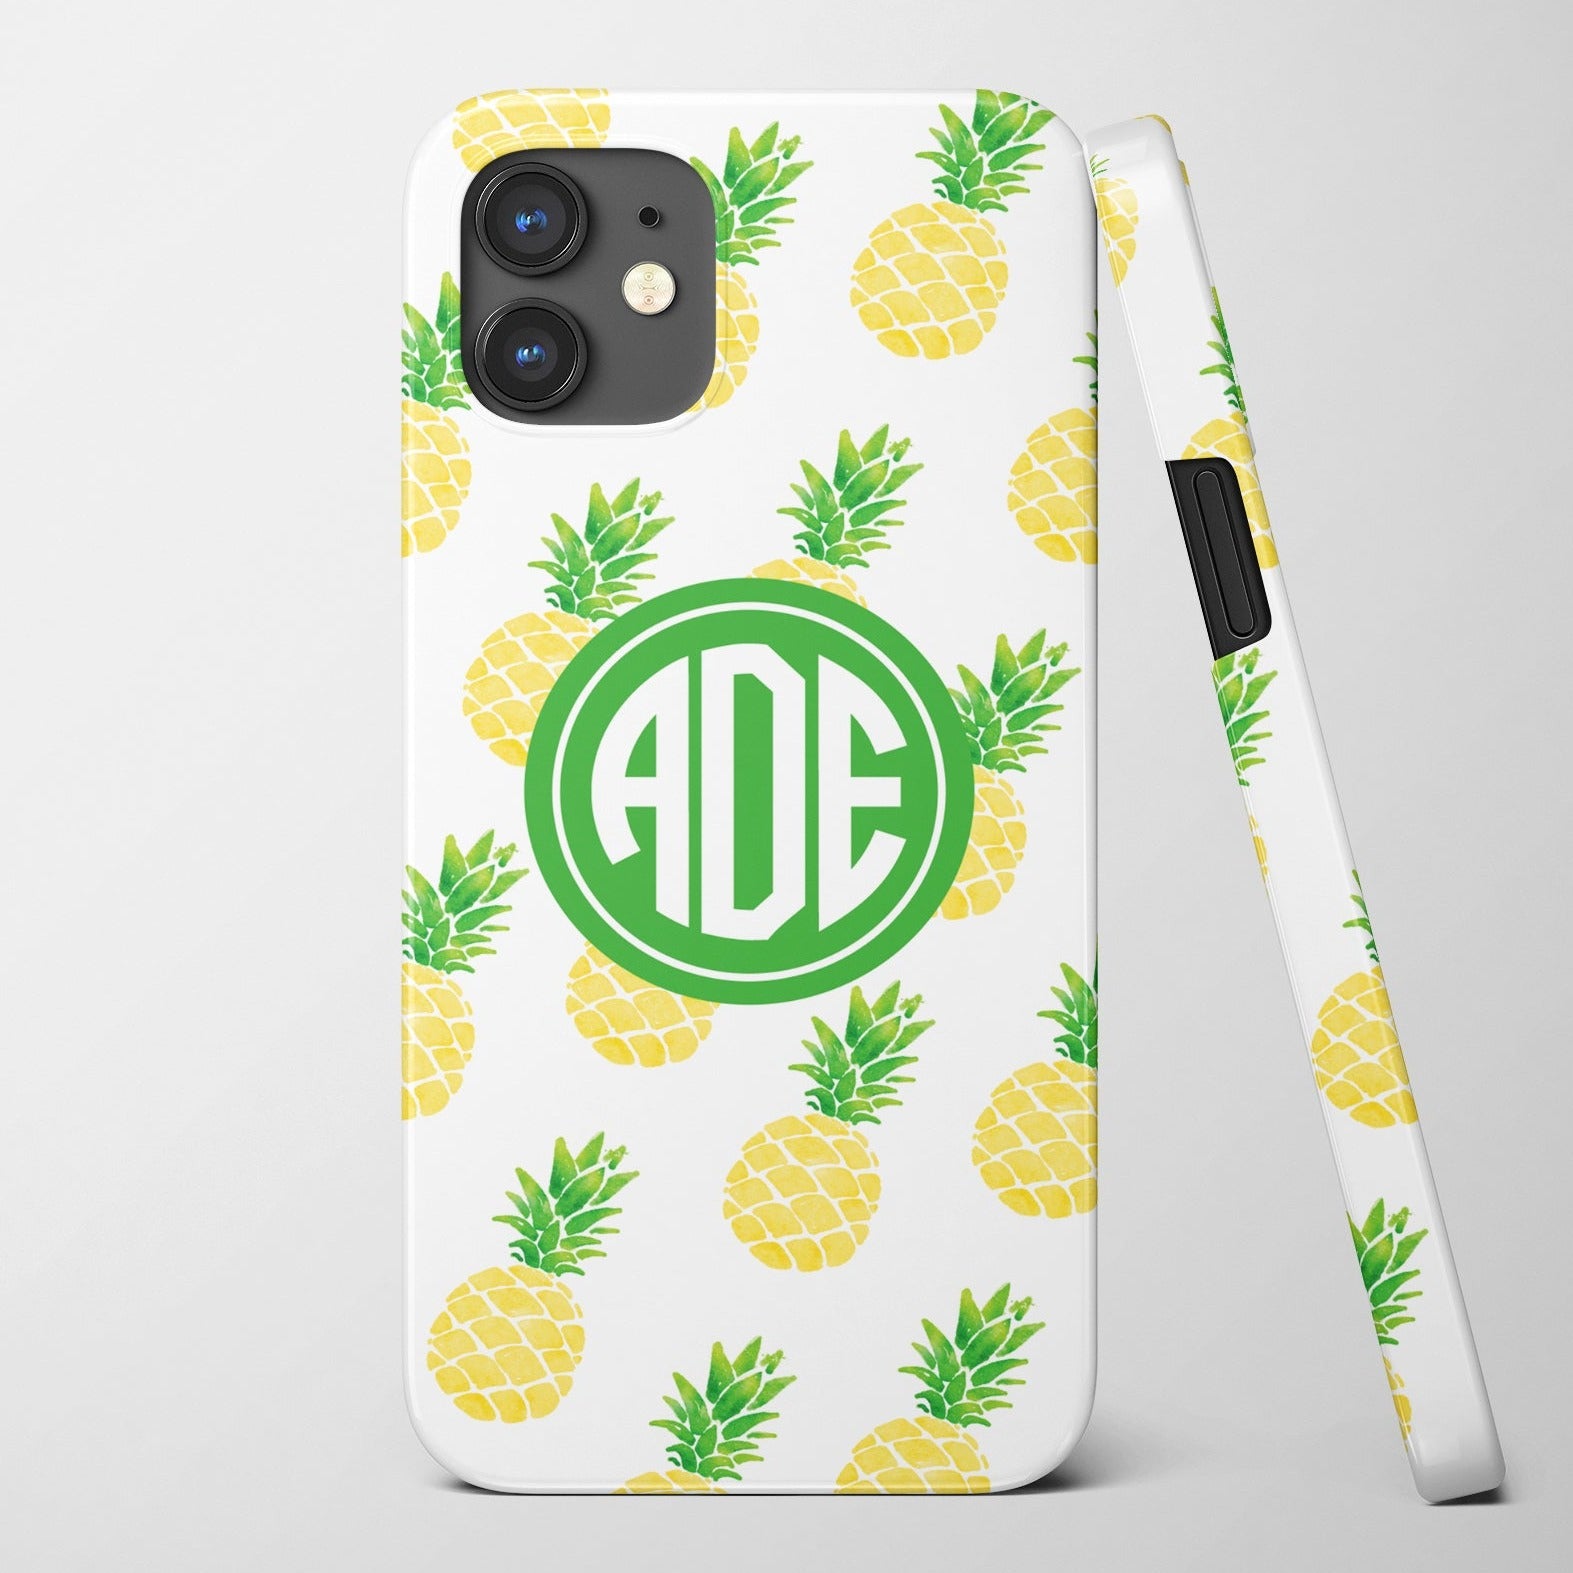 Pineapple Iphone case, monogrammed and personalized